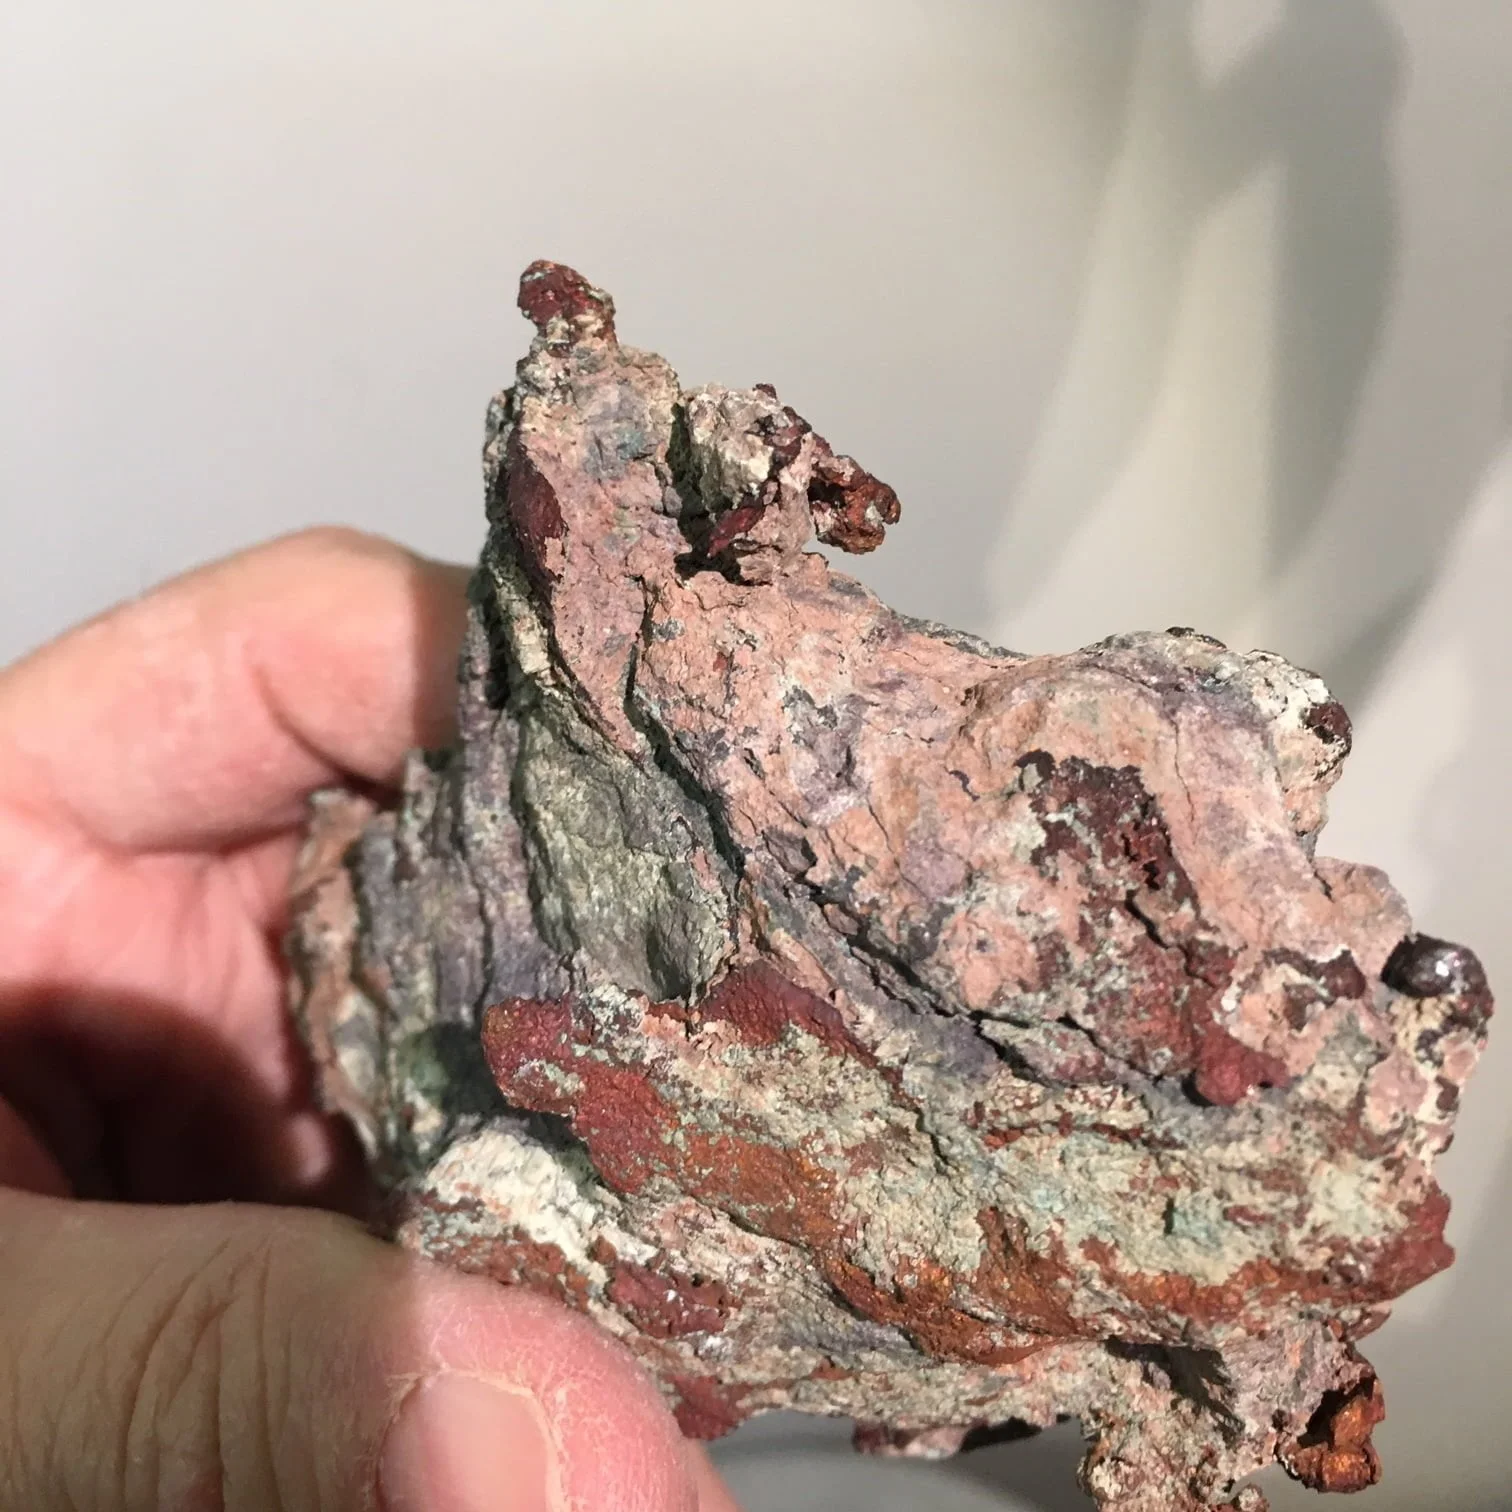 #C3 Copper Crystals on Vein from Michigan Upper Peninsula